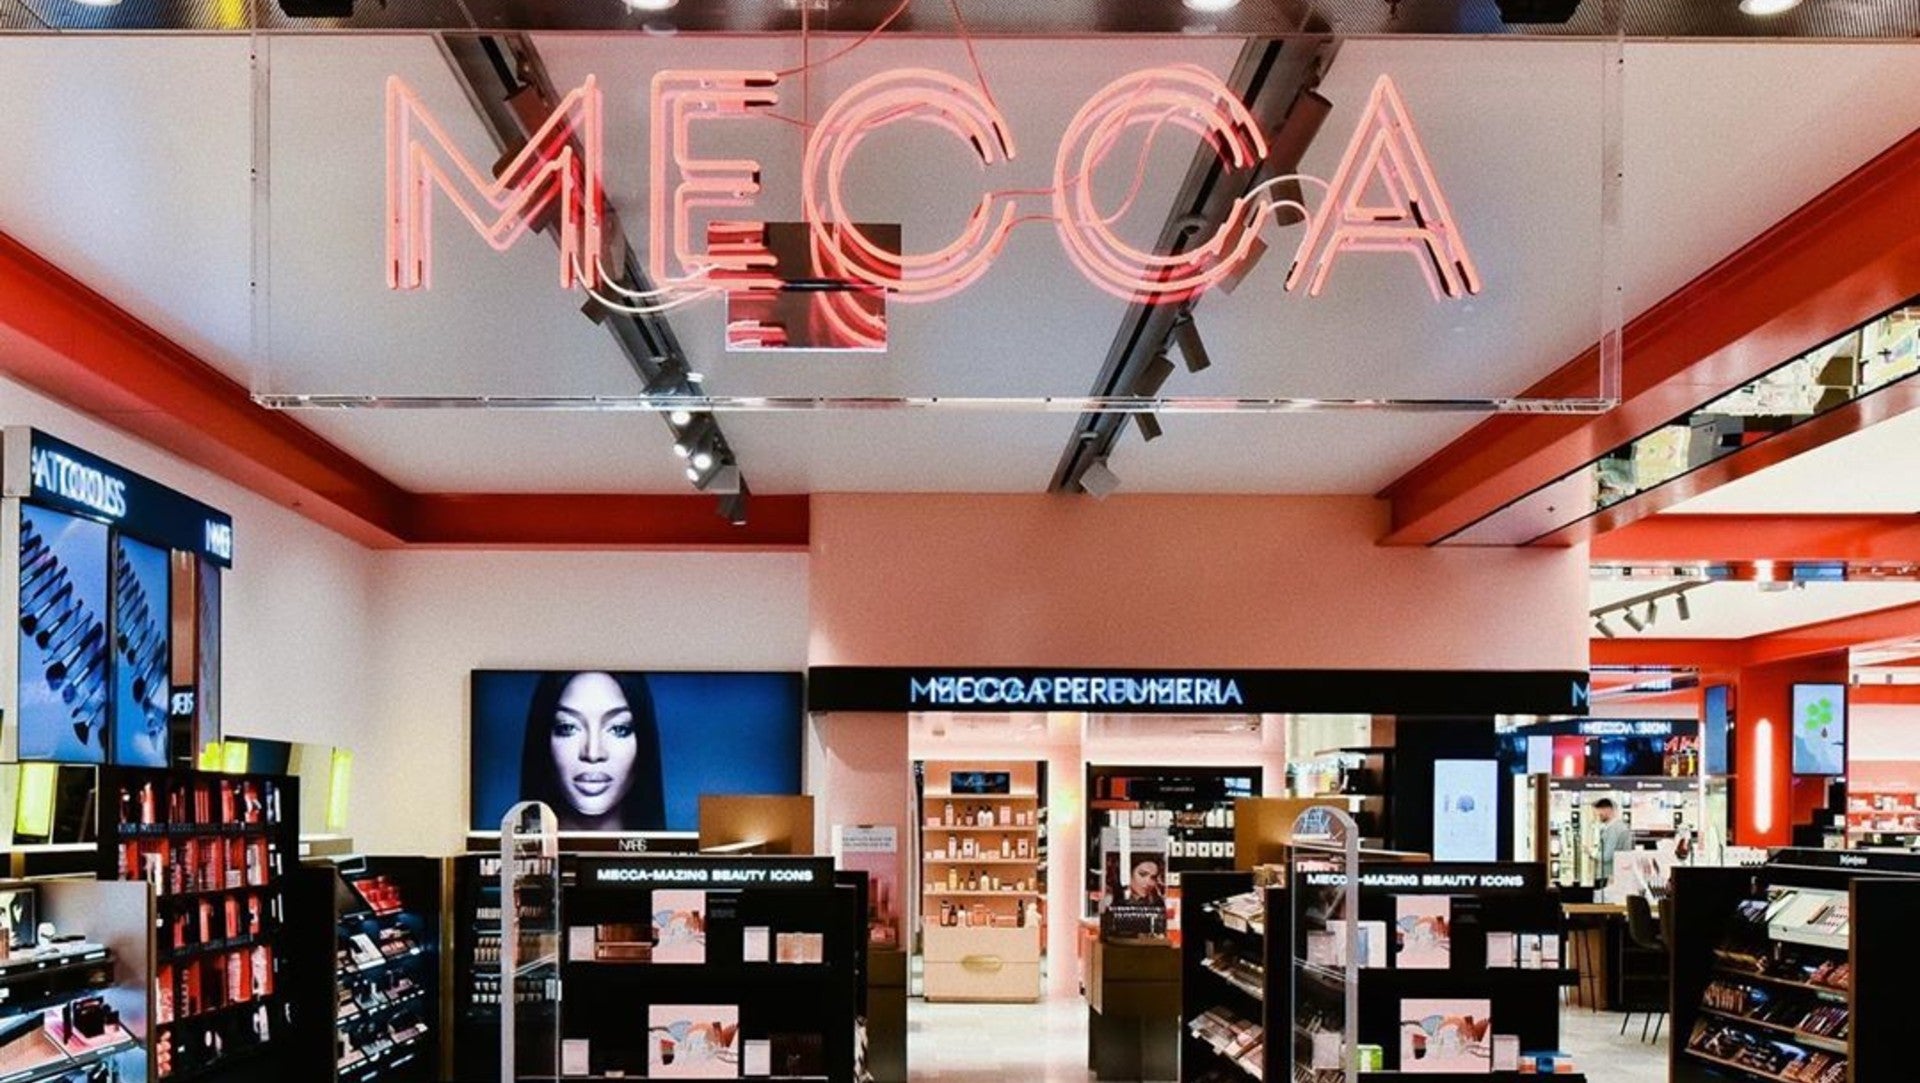 Beauty Fans Sound Off On Mecca Cosmetica’s Use Of The Holy City In Its Name